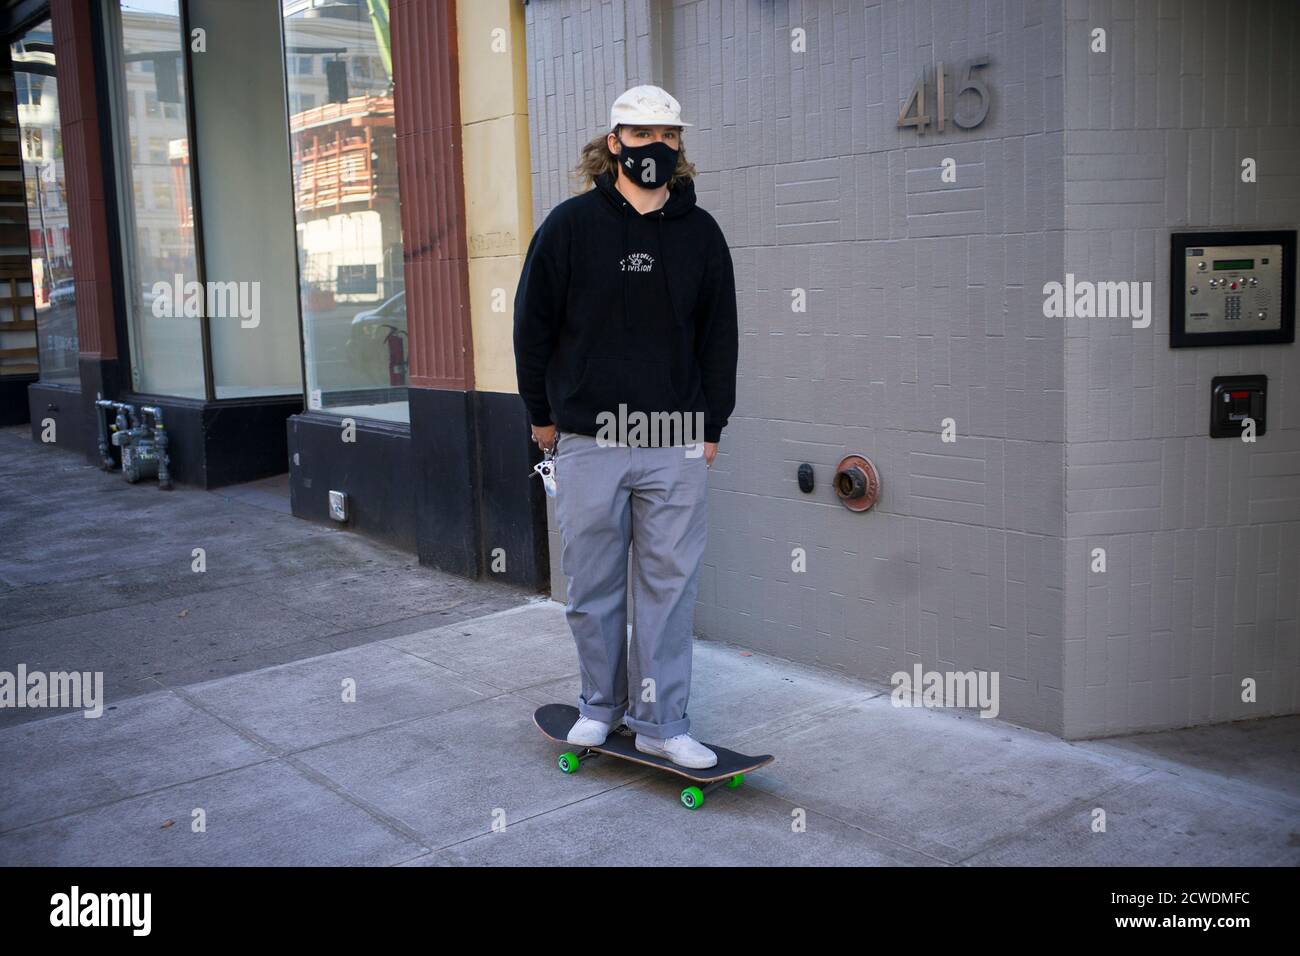 Portland, USA. 27th Sep, 2020. A young man plays skateboard in Portland, the United States, Sept. 27, 2020. The COVID-19 infection rate among adolescents aged between 12 and 17 is 'approximately double' that of younger children, according to a new report by the U.S. Centers for Disease Control and Prevention (CDC). Credit: Alan Chin/Xinhua/Alamy Live News Stock Photo